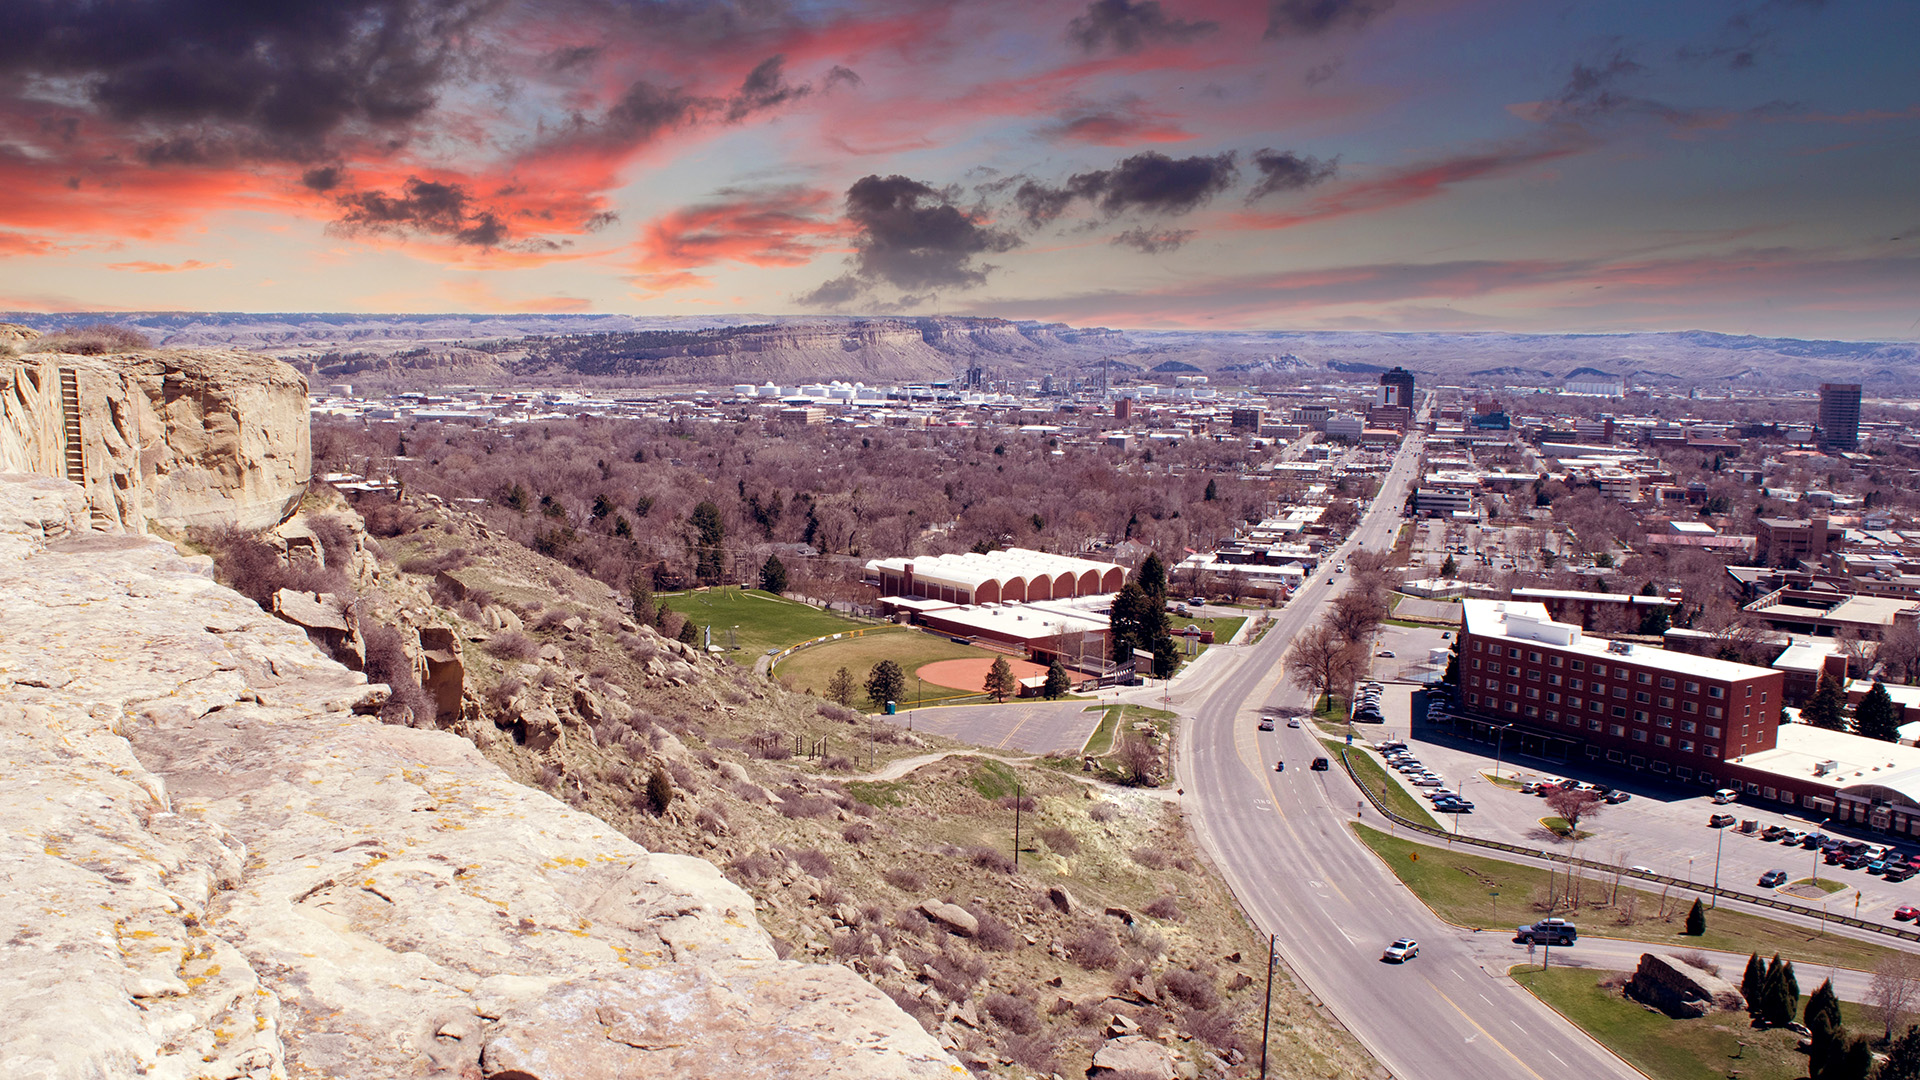 Billings view, with rimrock in the foreground